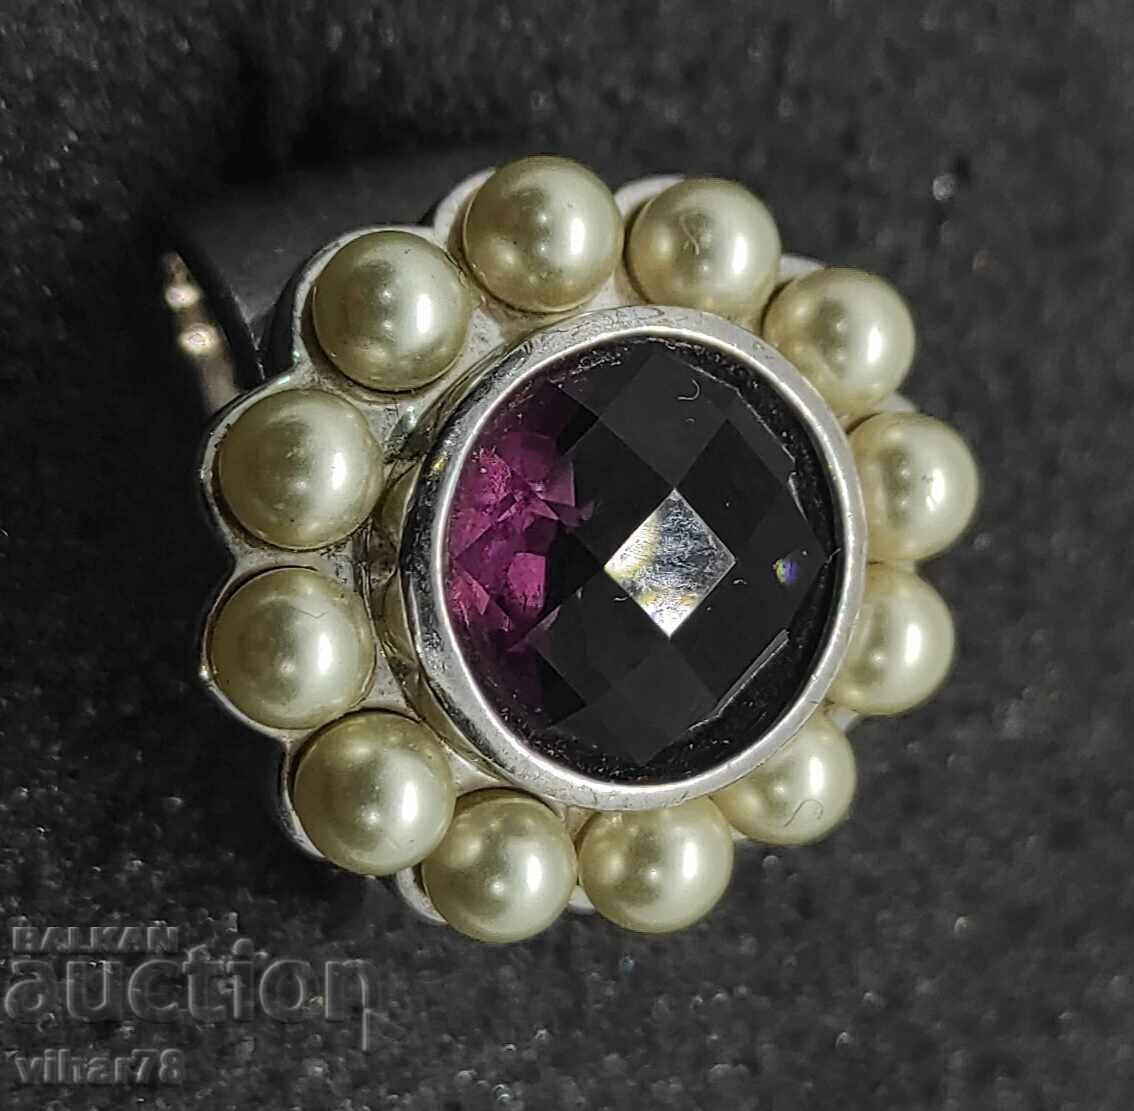 VERY BEAUTIFUL SILVER WOMEN'S RING WITH AMETHYST